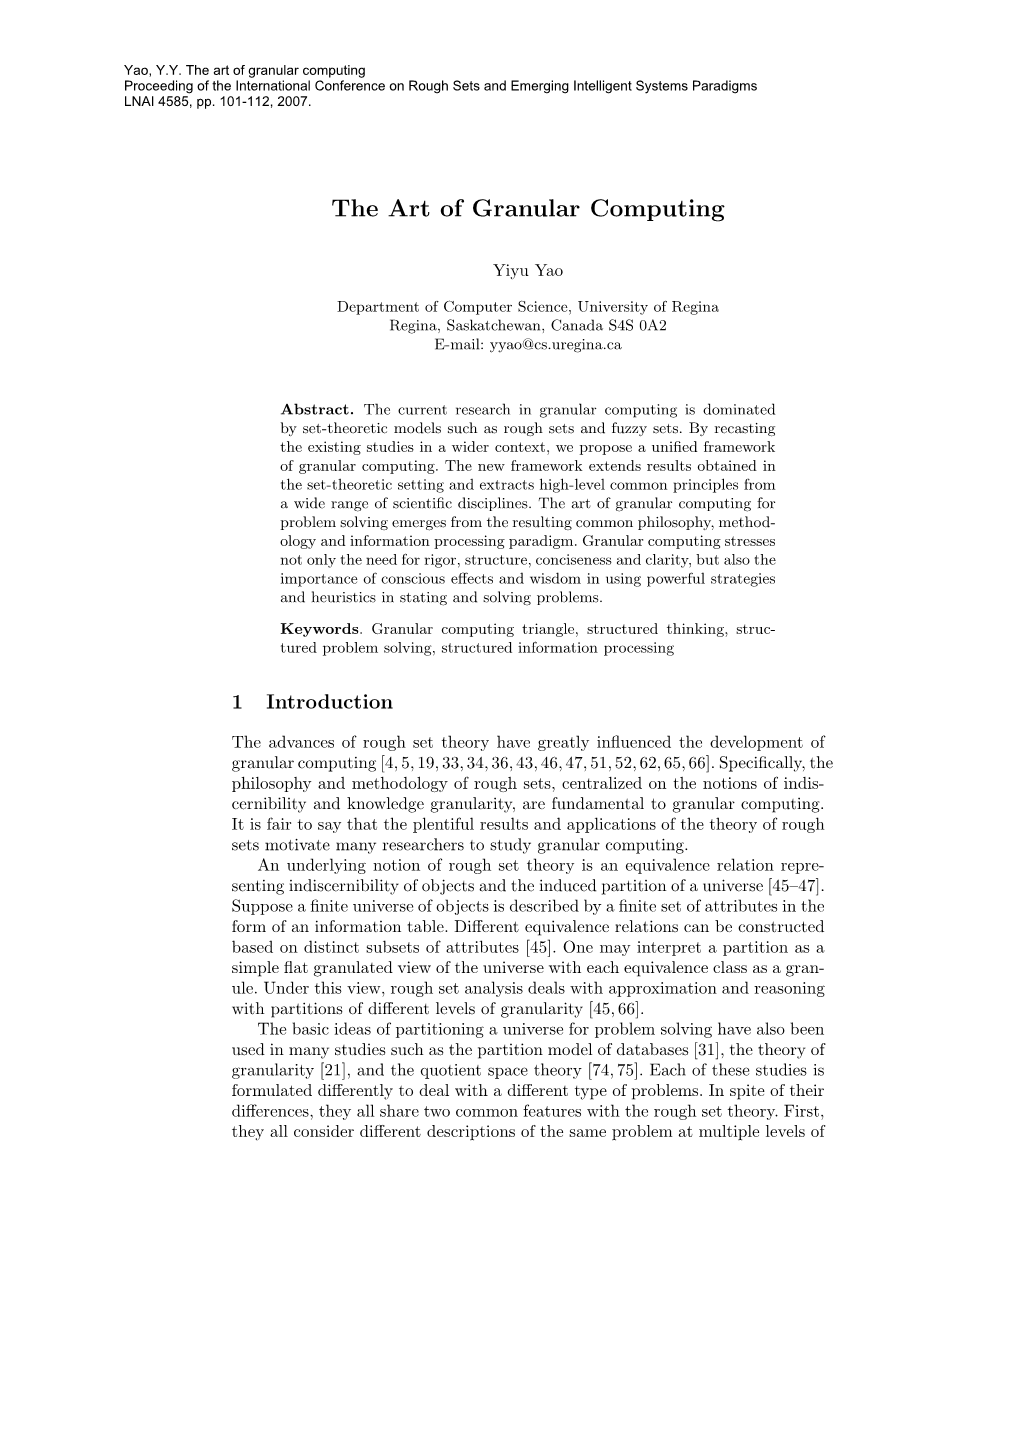 The Art of Granular Computing Proceeding of the International Conference on Rough Sets and Emerging Intelligent Systems Paradigms LNAI 4585, Pp